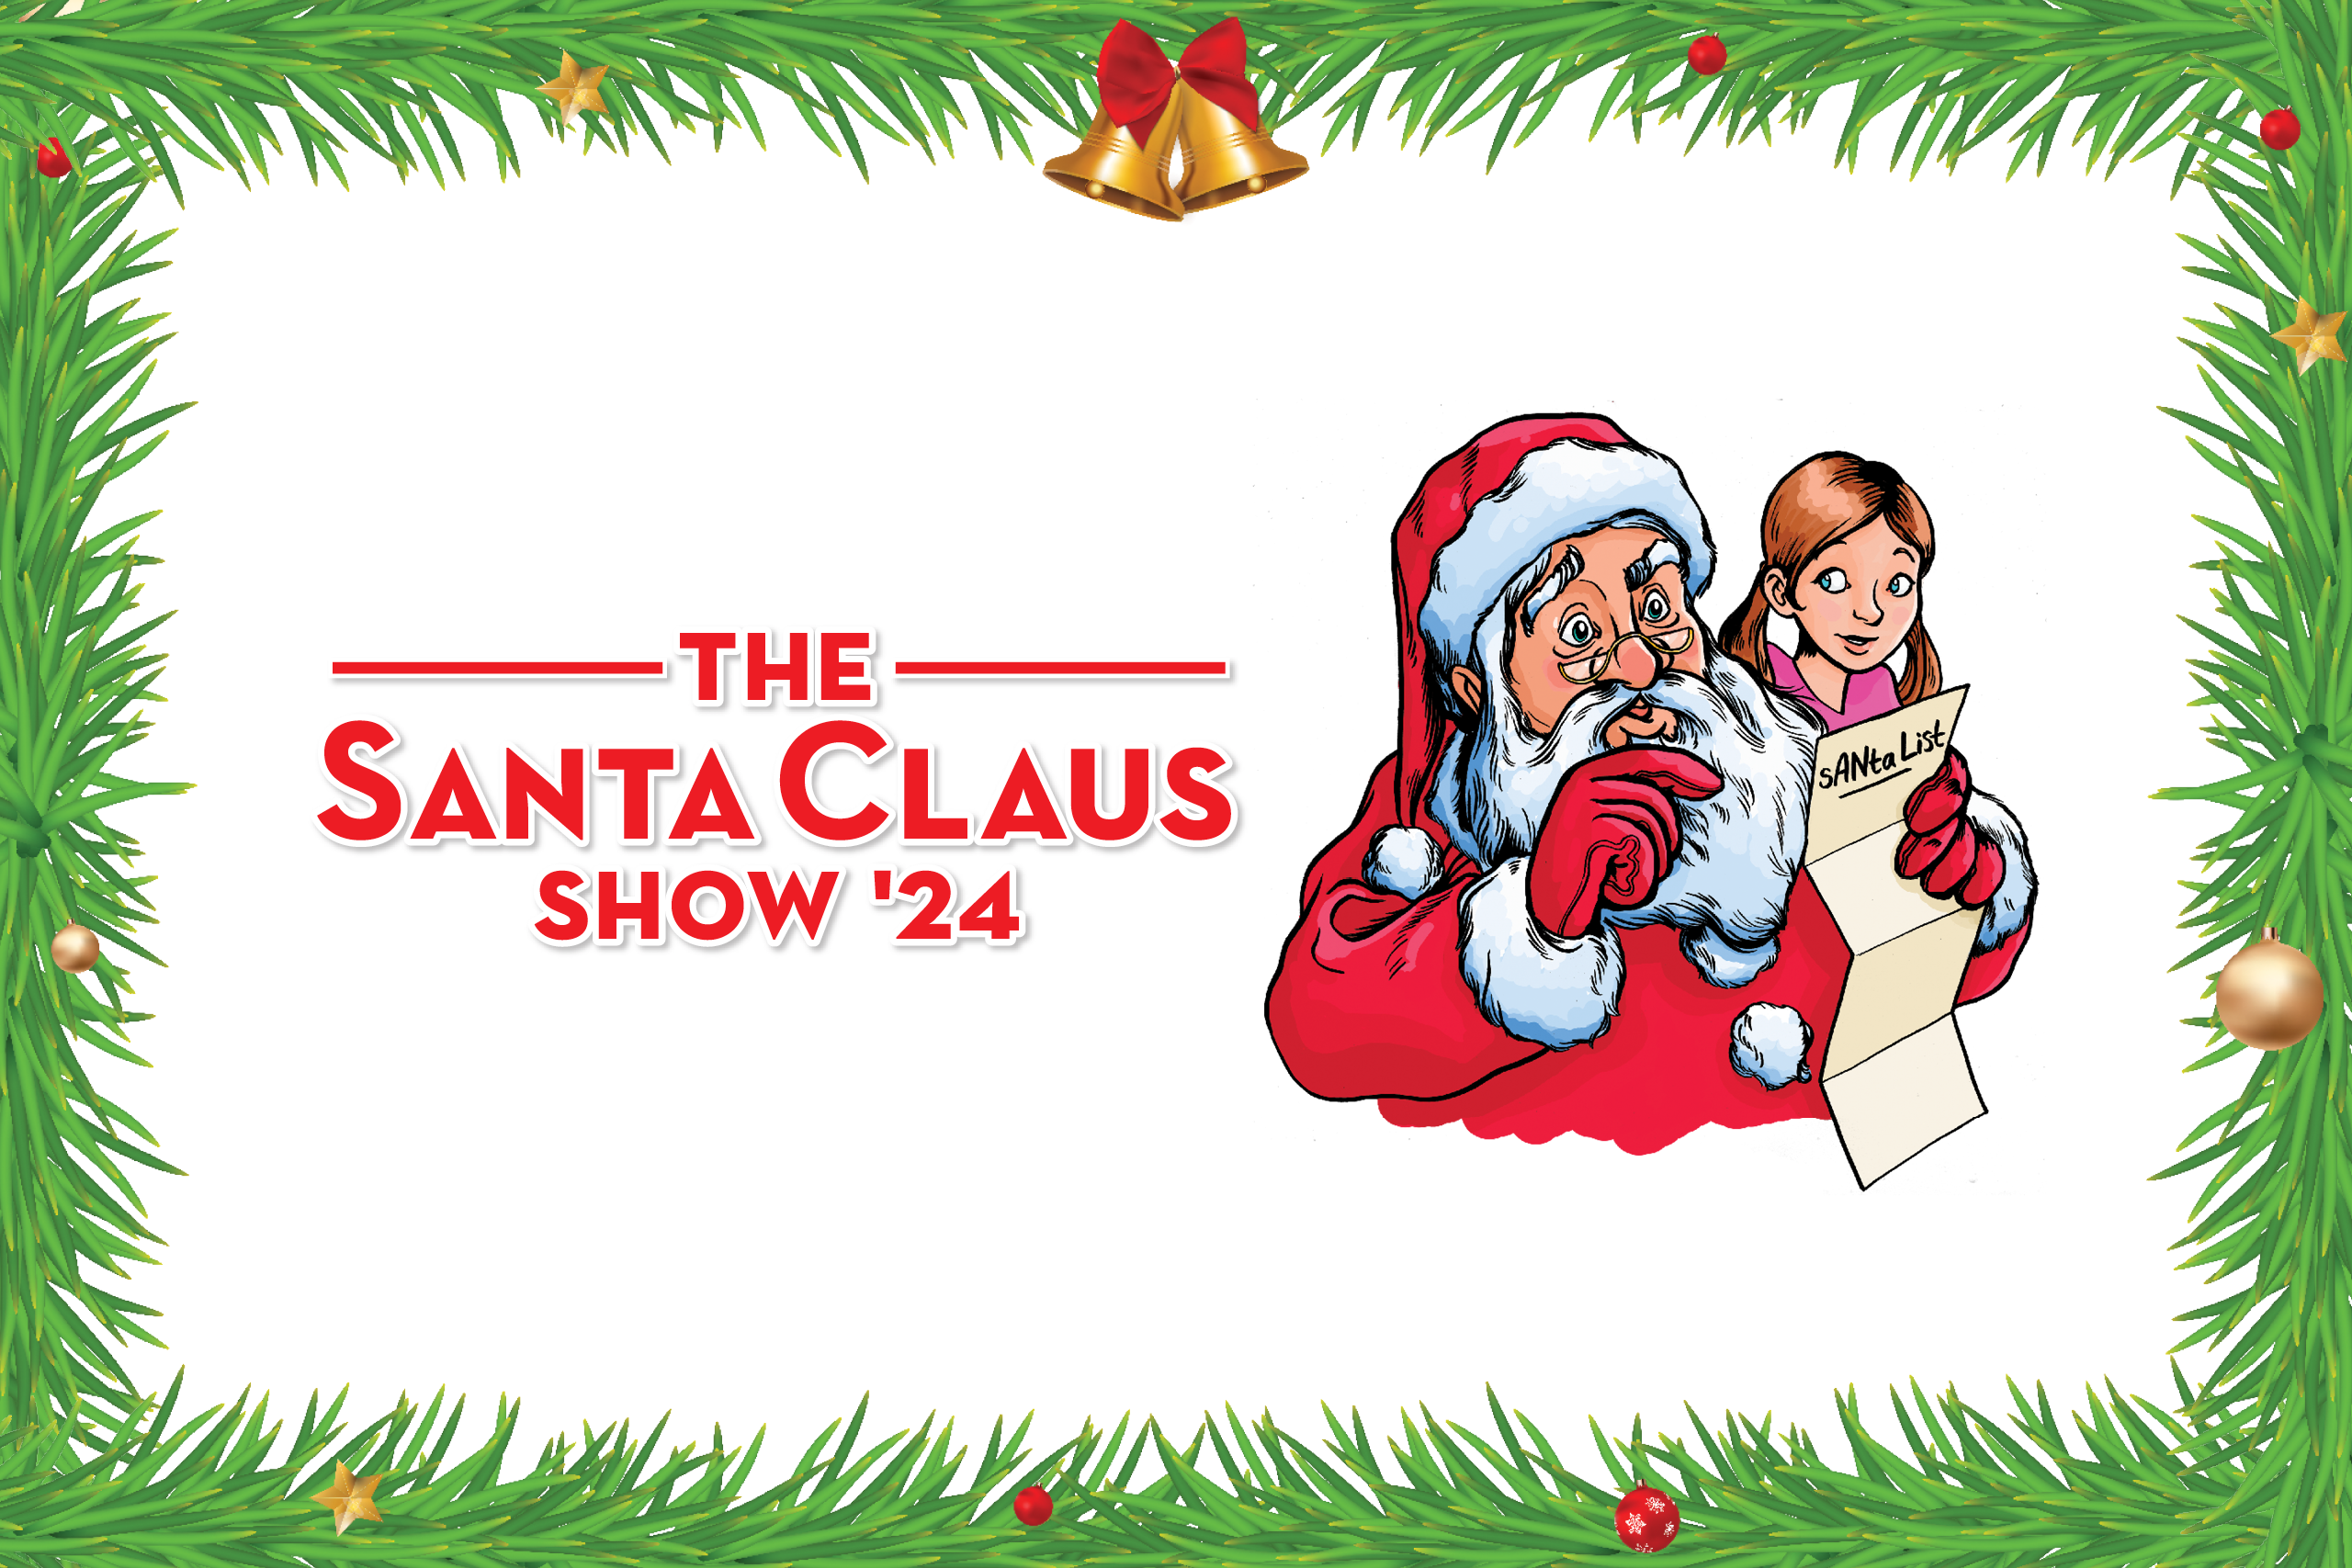 Illustration of Santa reading a list and a girl is looking over his shoulder. On the right there is a sign saying: The Santa Claus Show '24